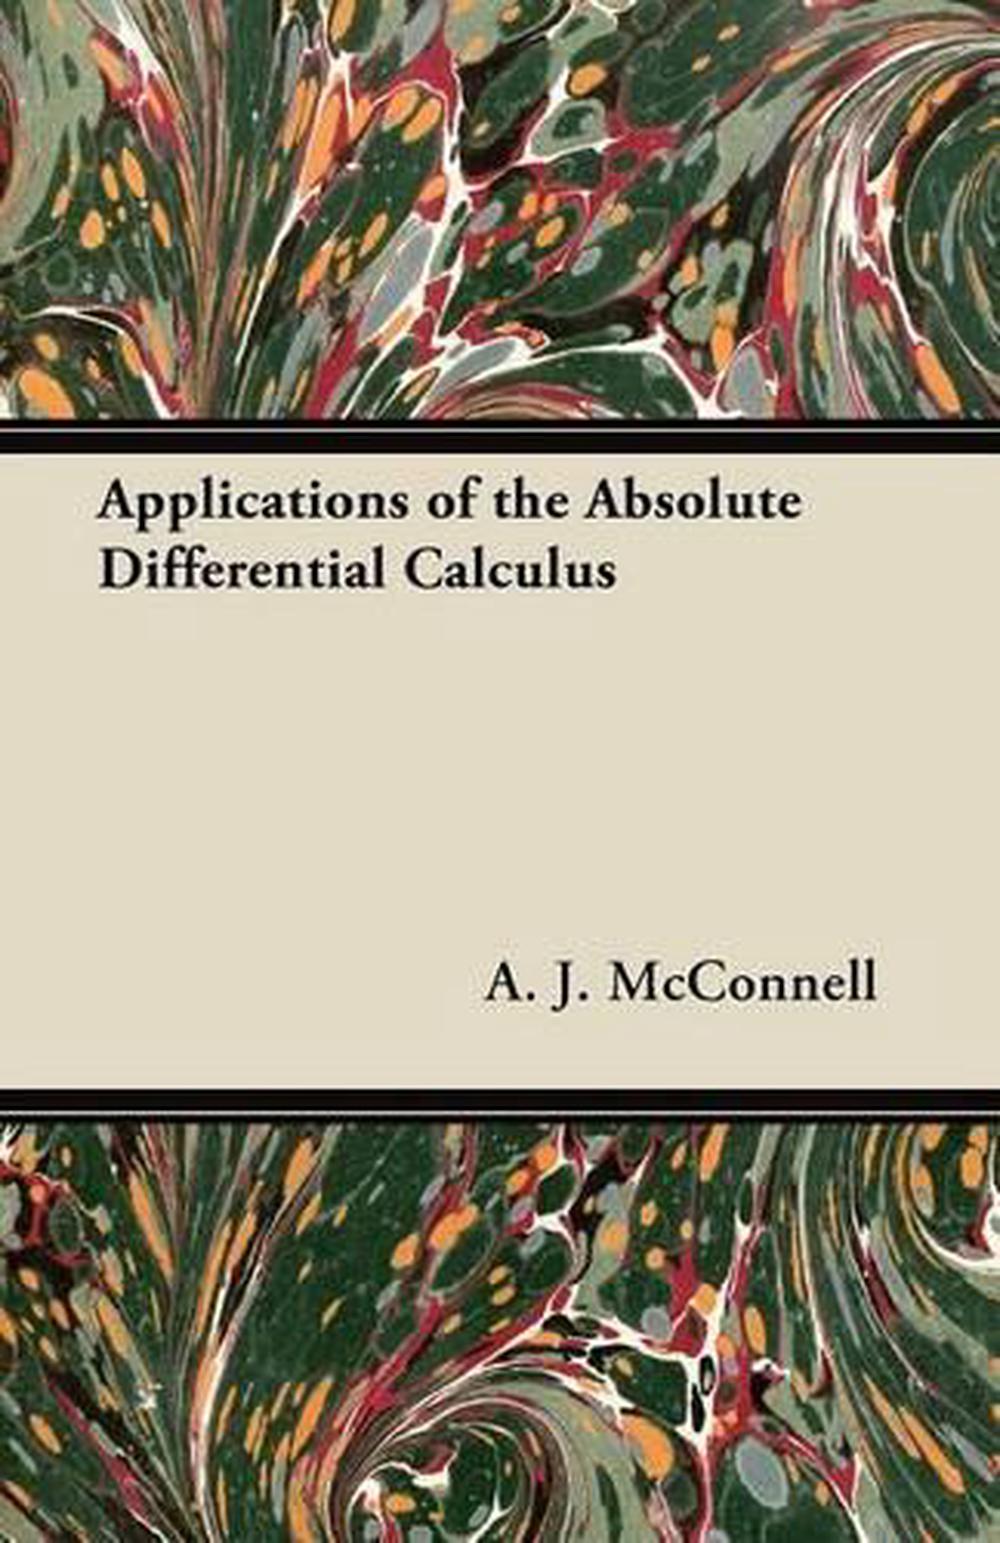 applications of differential calculus in various fields